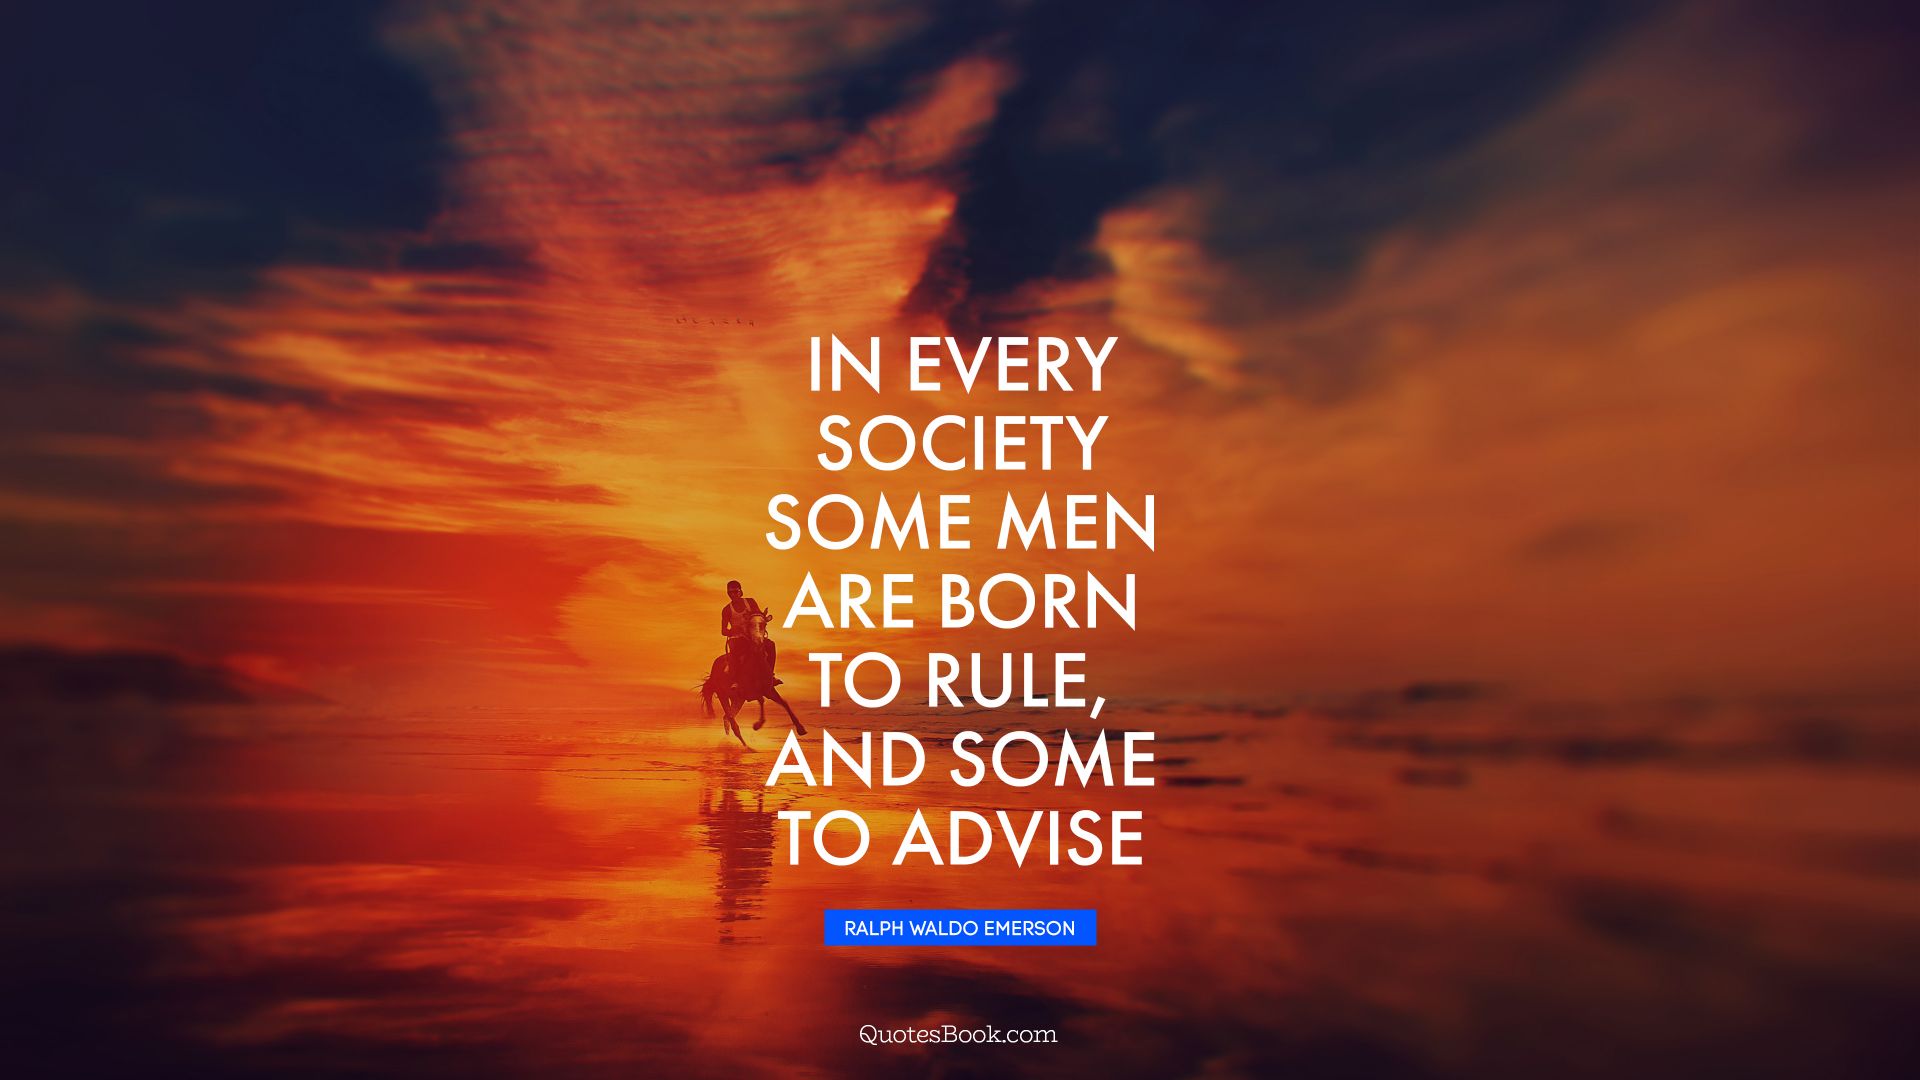 In every society some men are born to rule, and some to advise. - Quote by Ralph Waldo Emerson